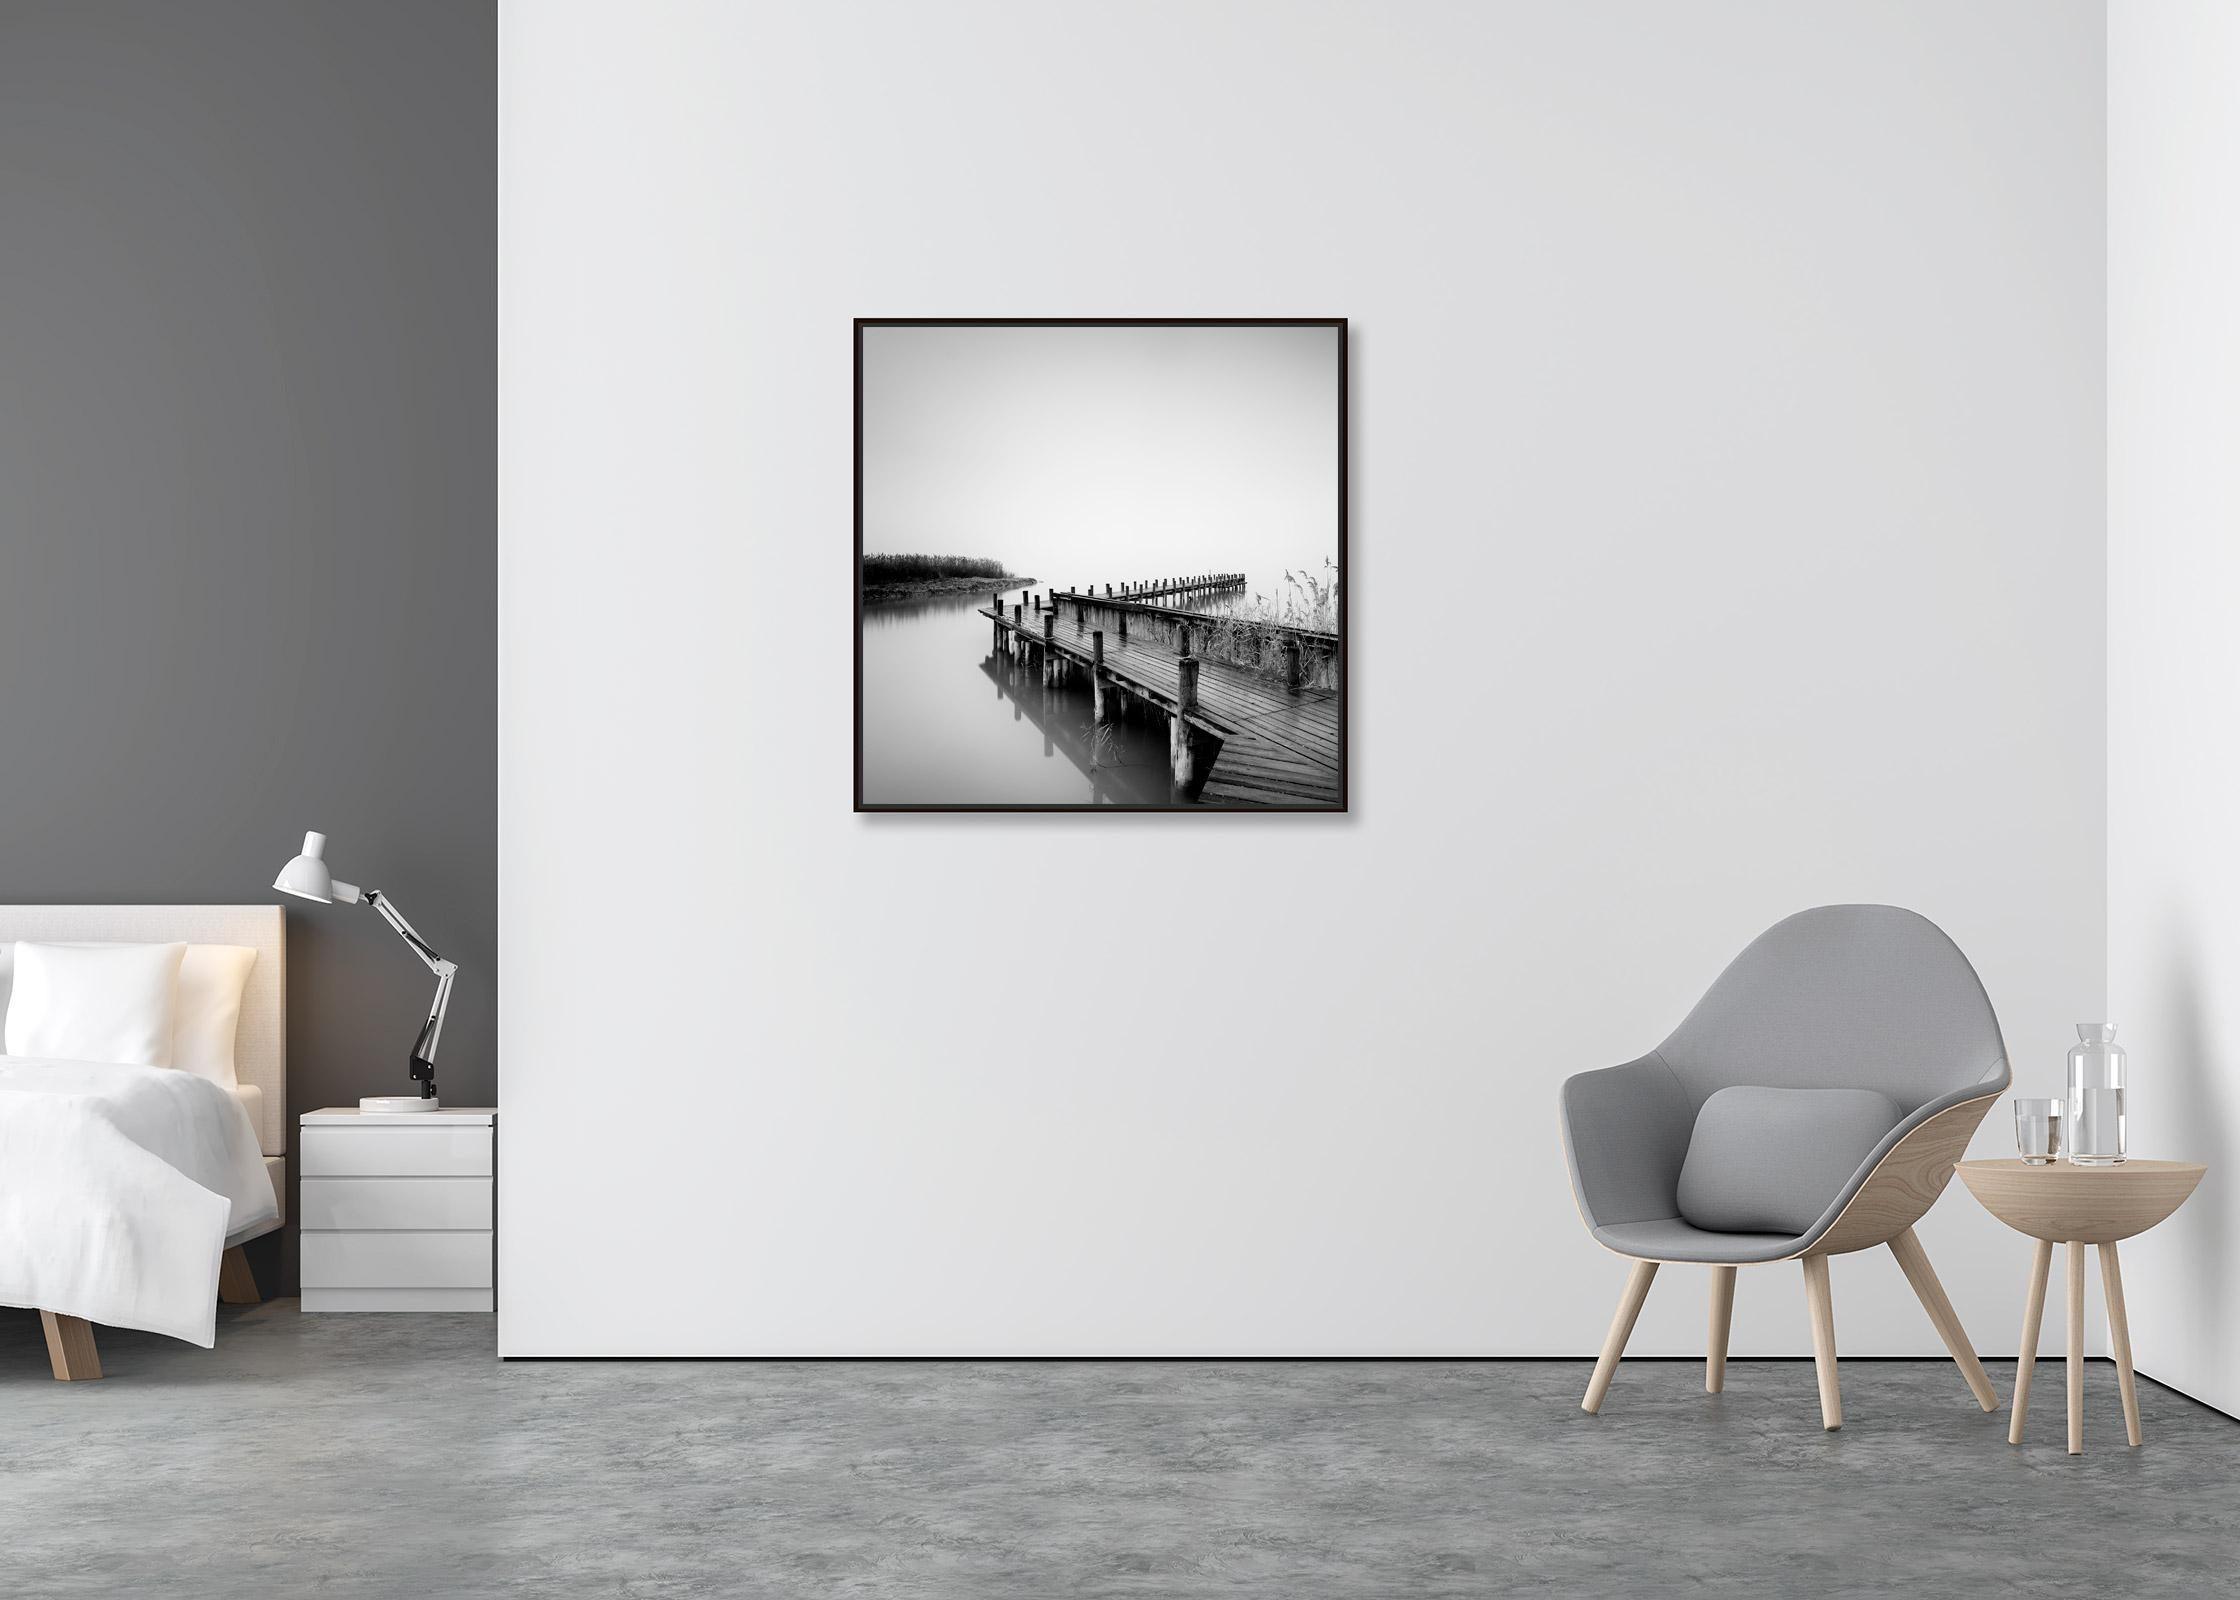 Jetty on calm Lake, foggy morning, black and white, long exposure art waterscape - Contemporary Photograph by Gerald Berghammer